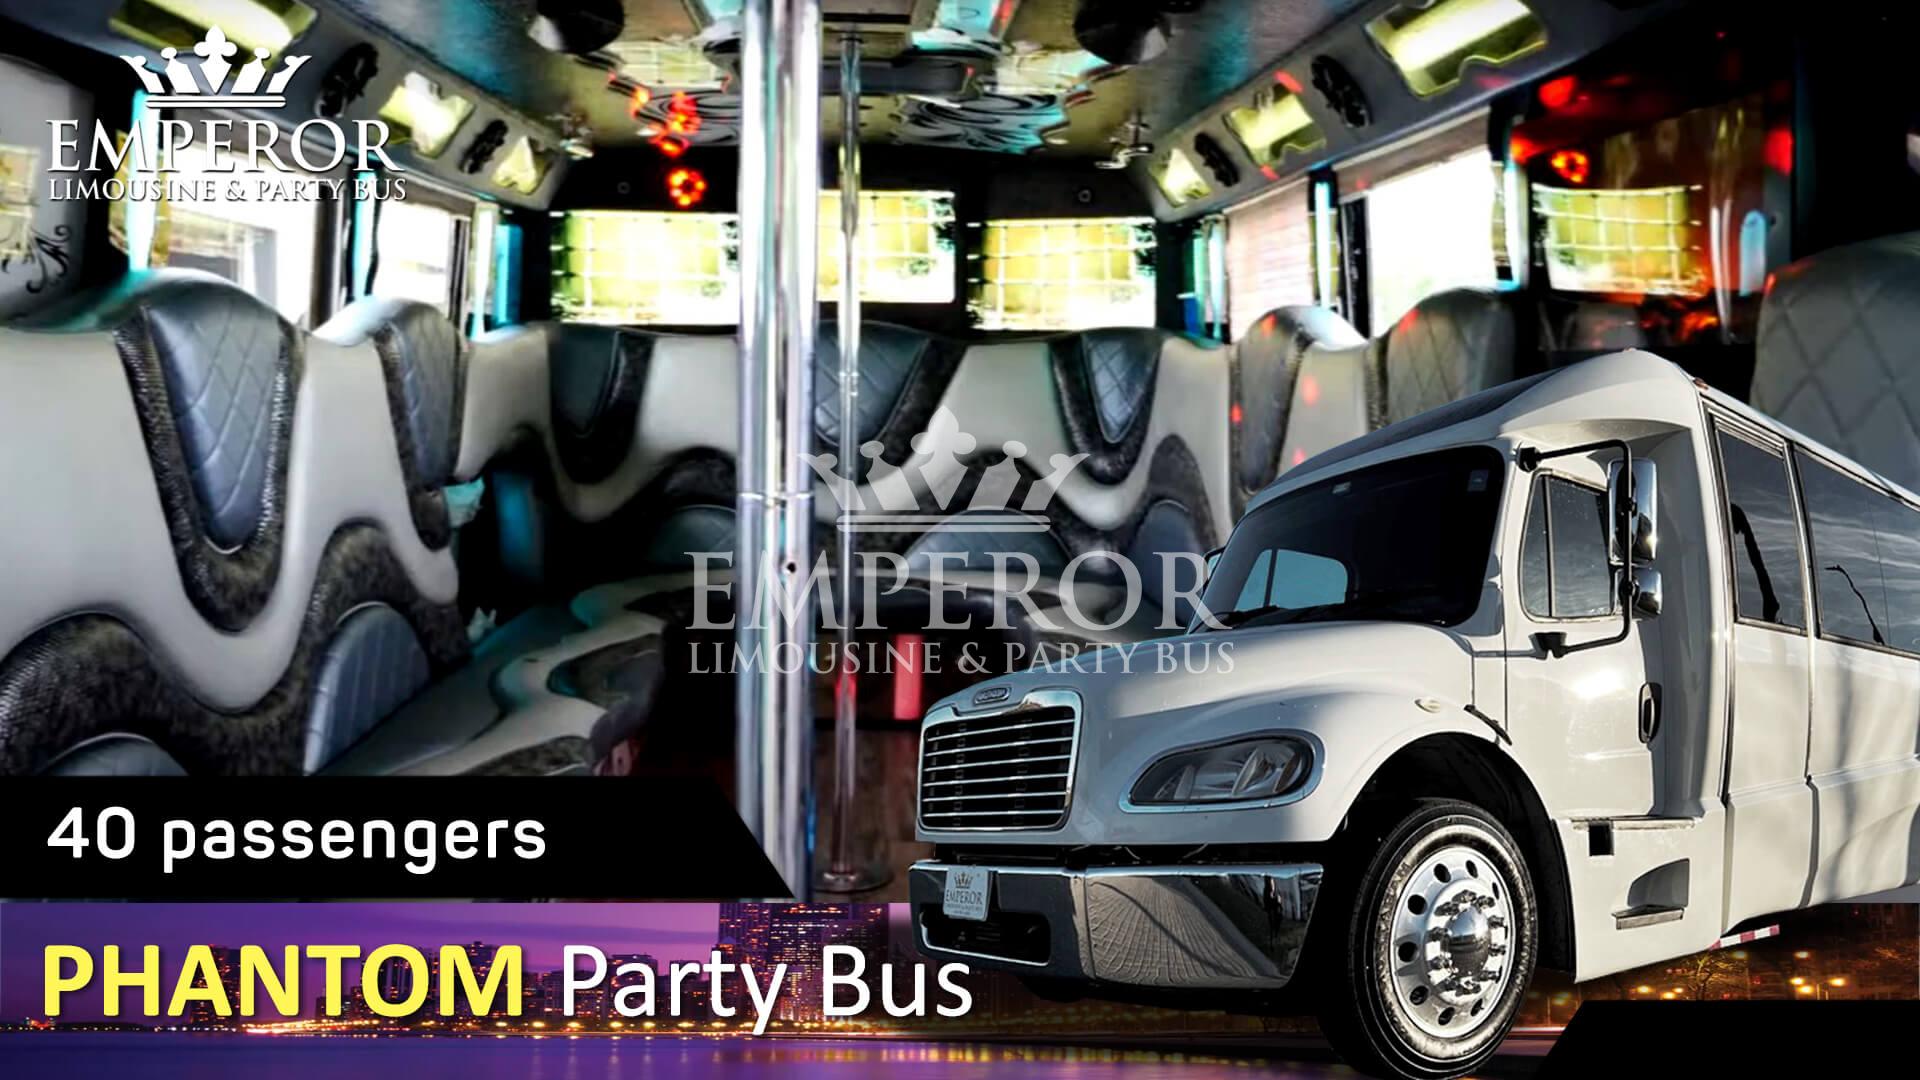 Bachelorette Party bus rental in Chicago - Phantom Edition